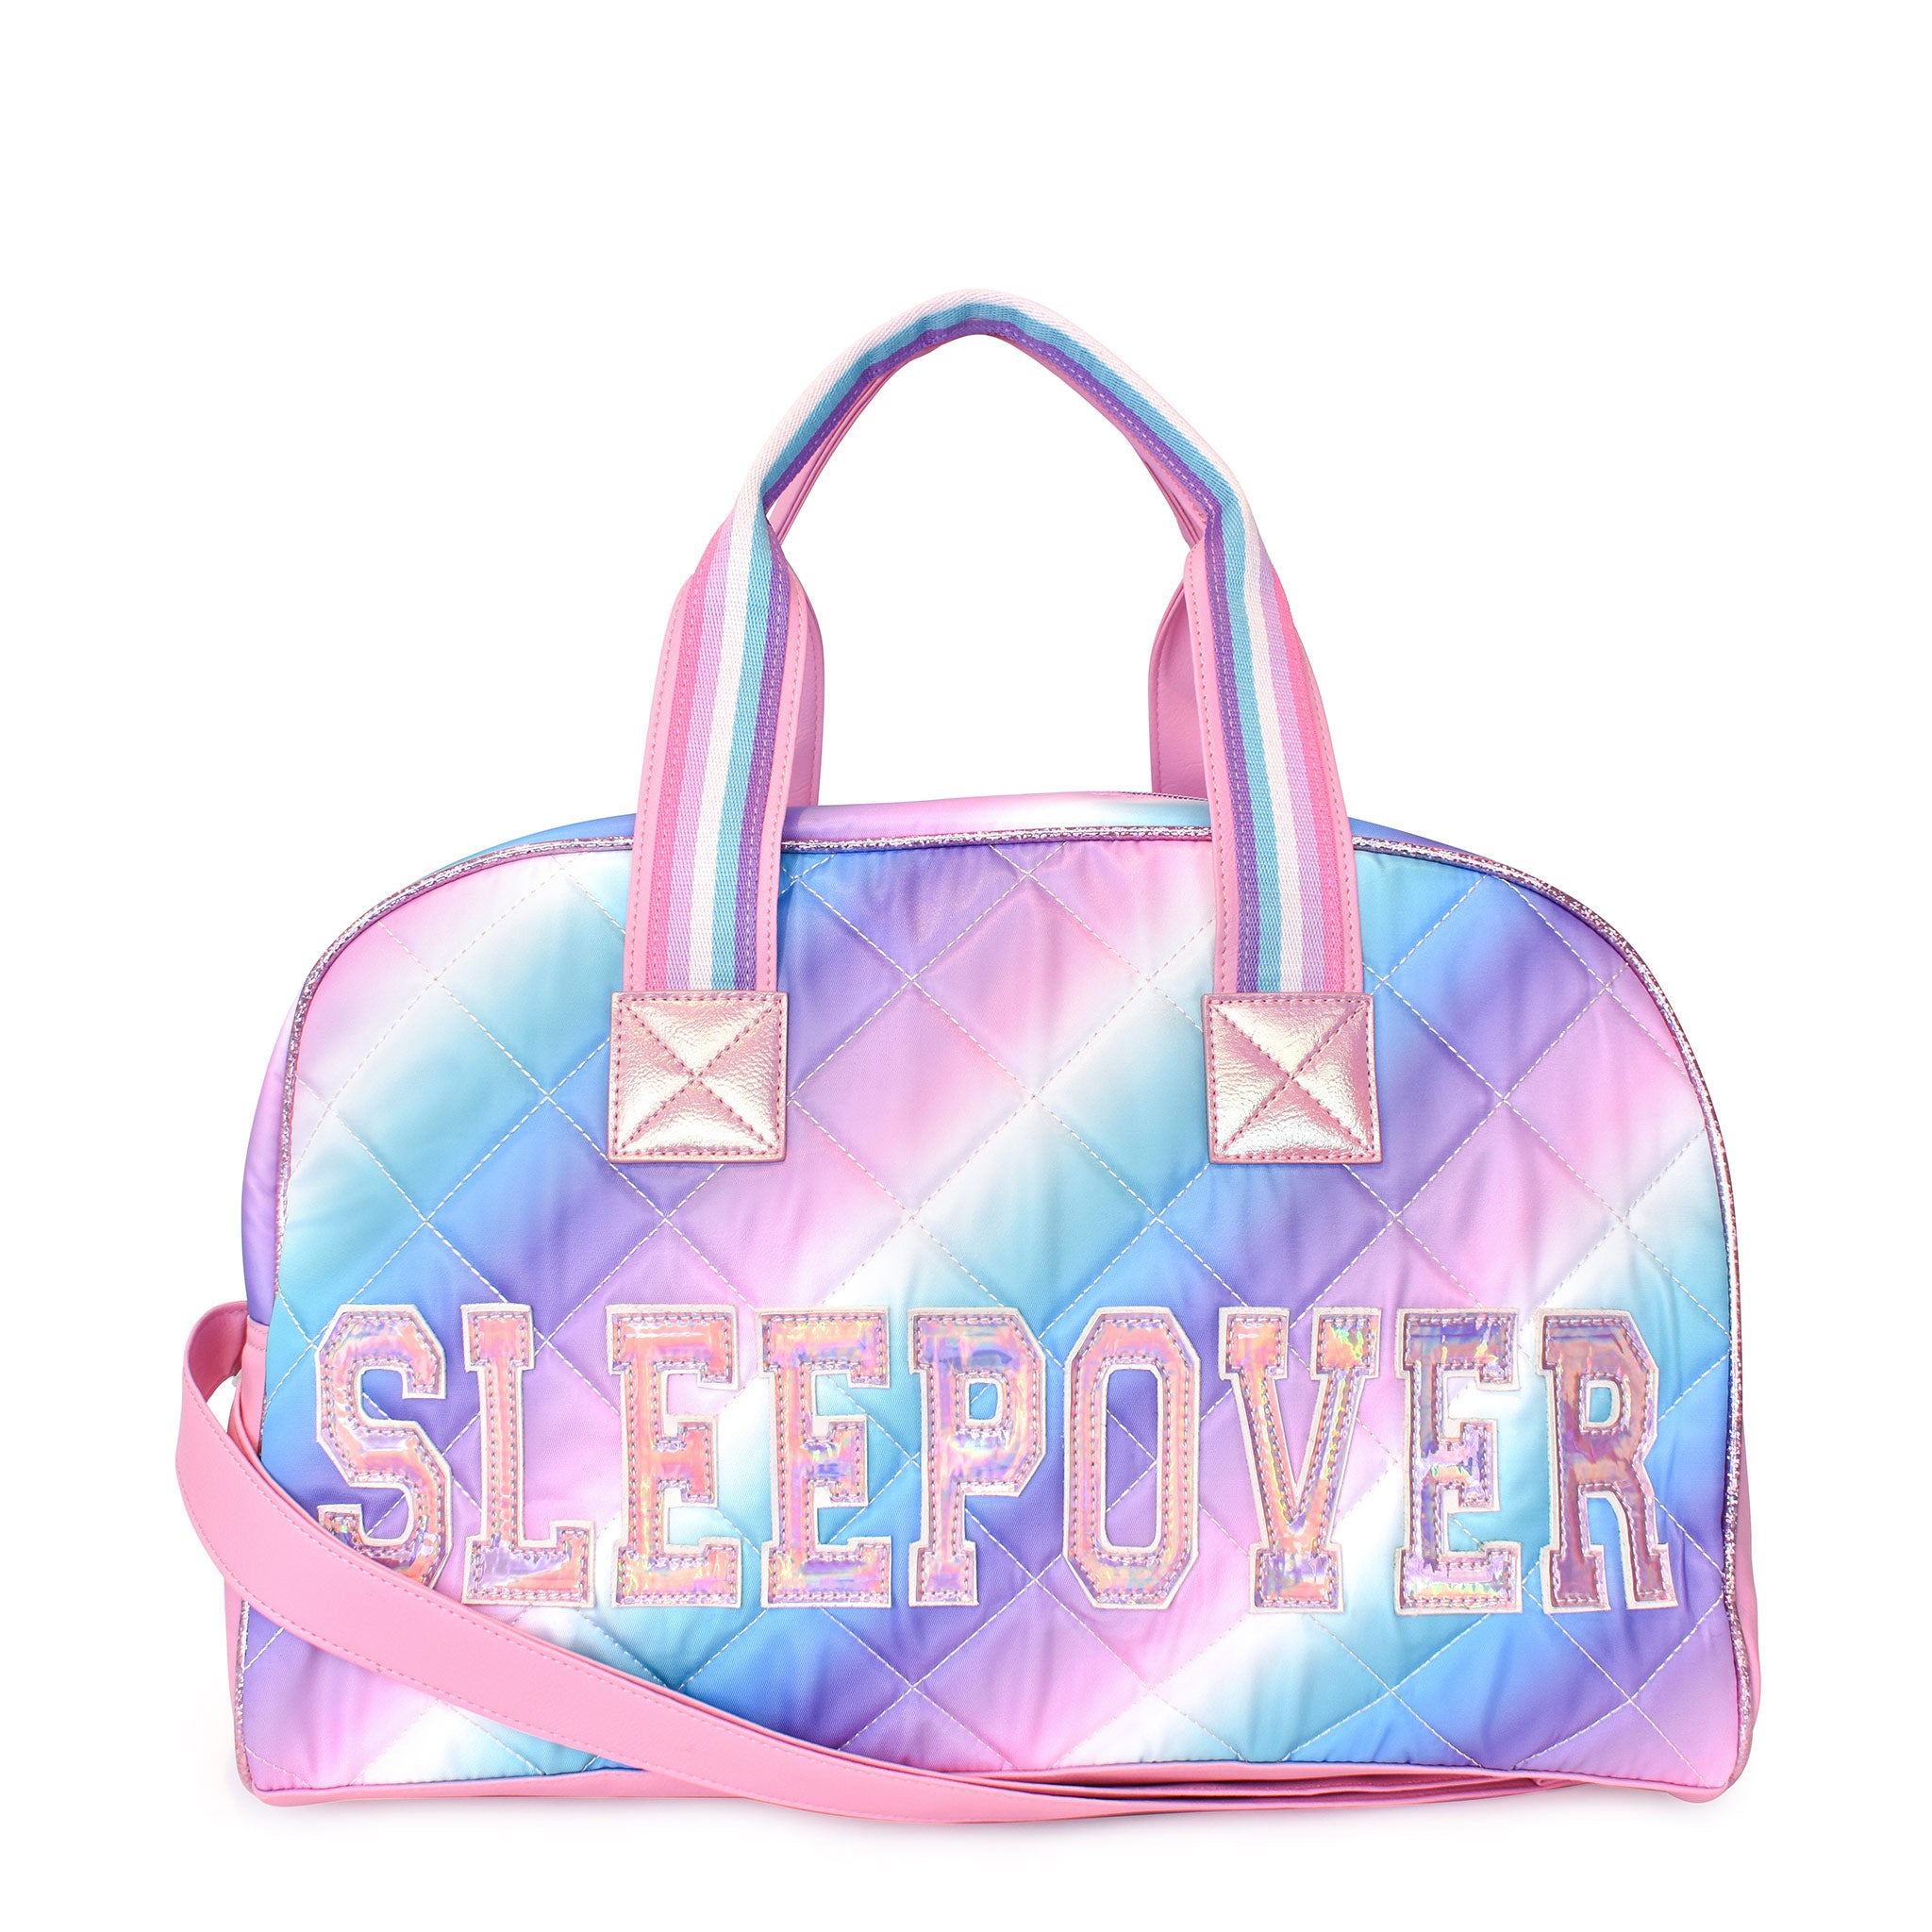 Front view of a cool toned ombre quilted medium duffle bag with metallic varsity letters 'Sleepover' and an adjustable shoulder strap 